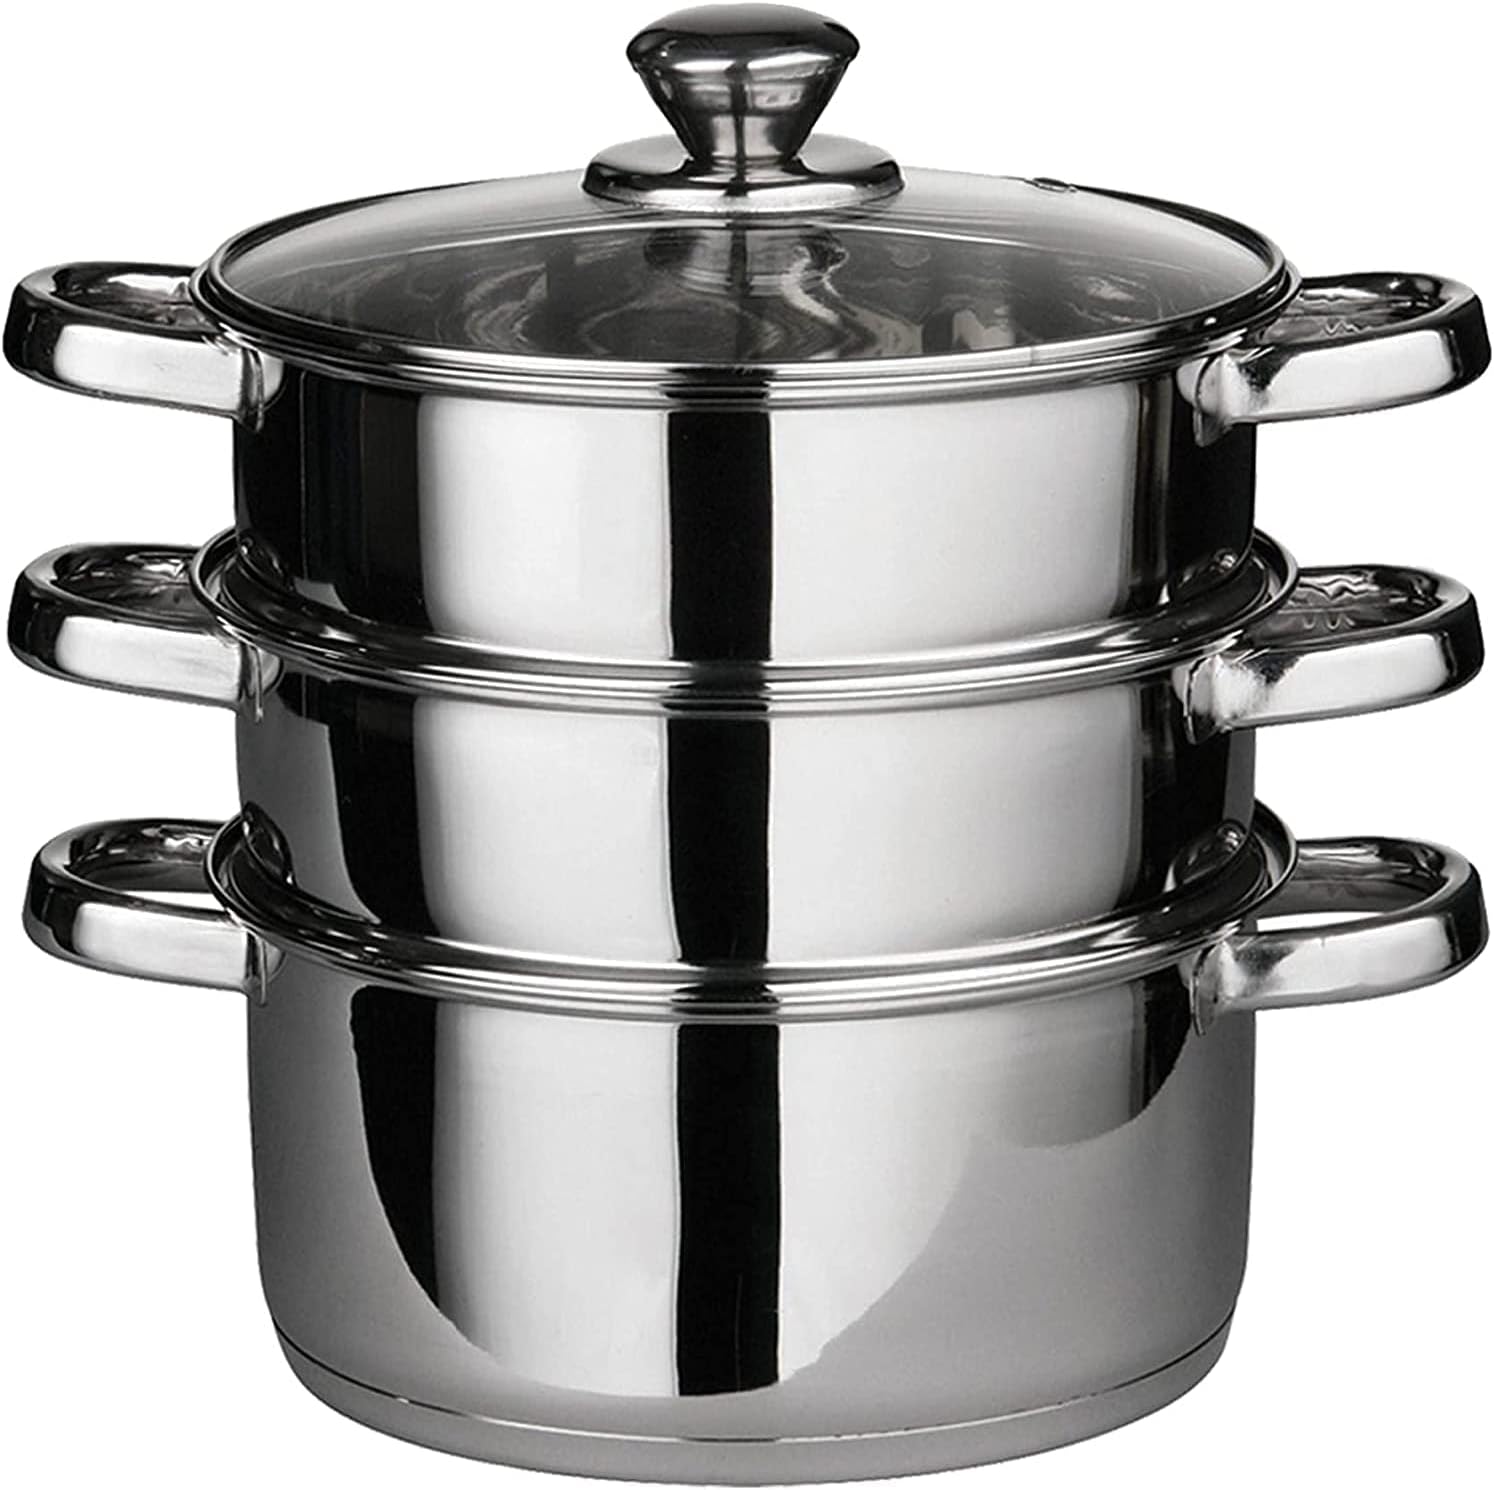 22cm 3 Tier Stainless Steal Steamer